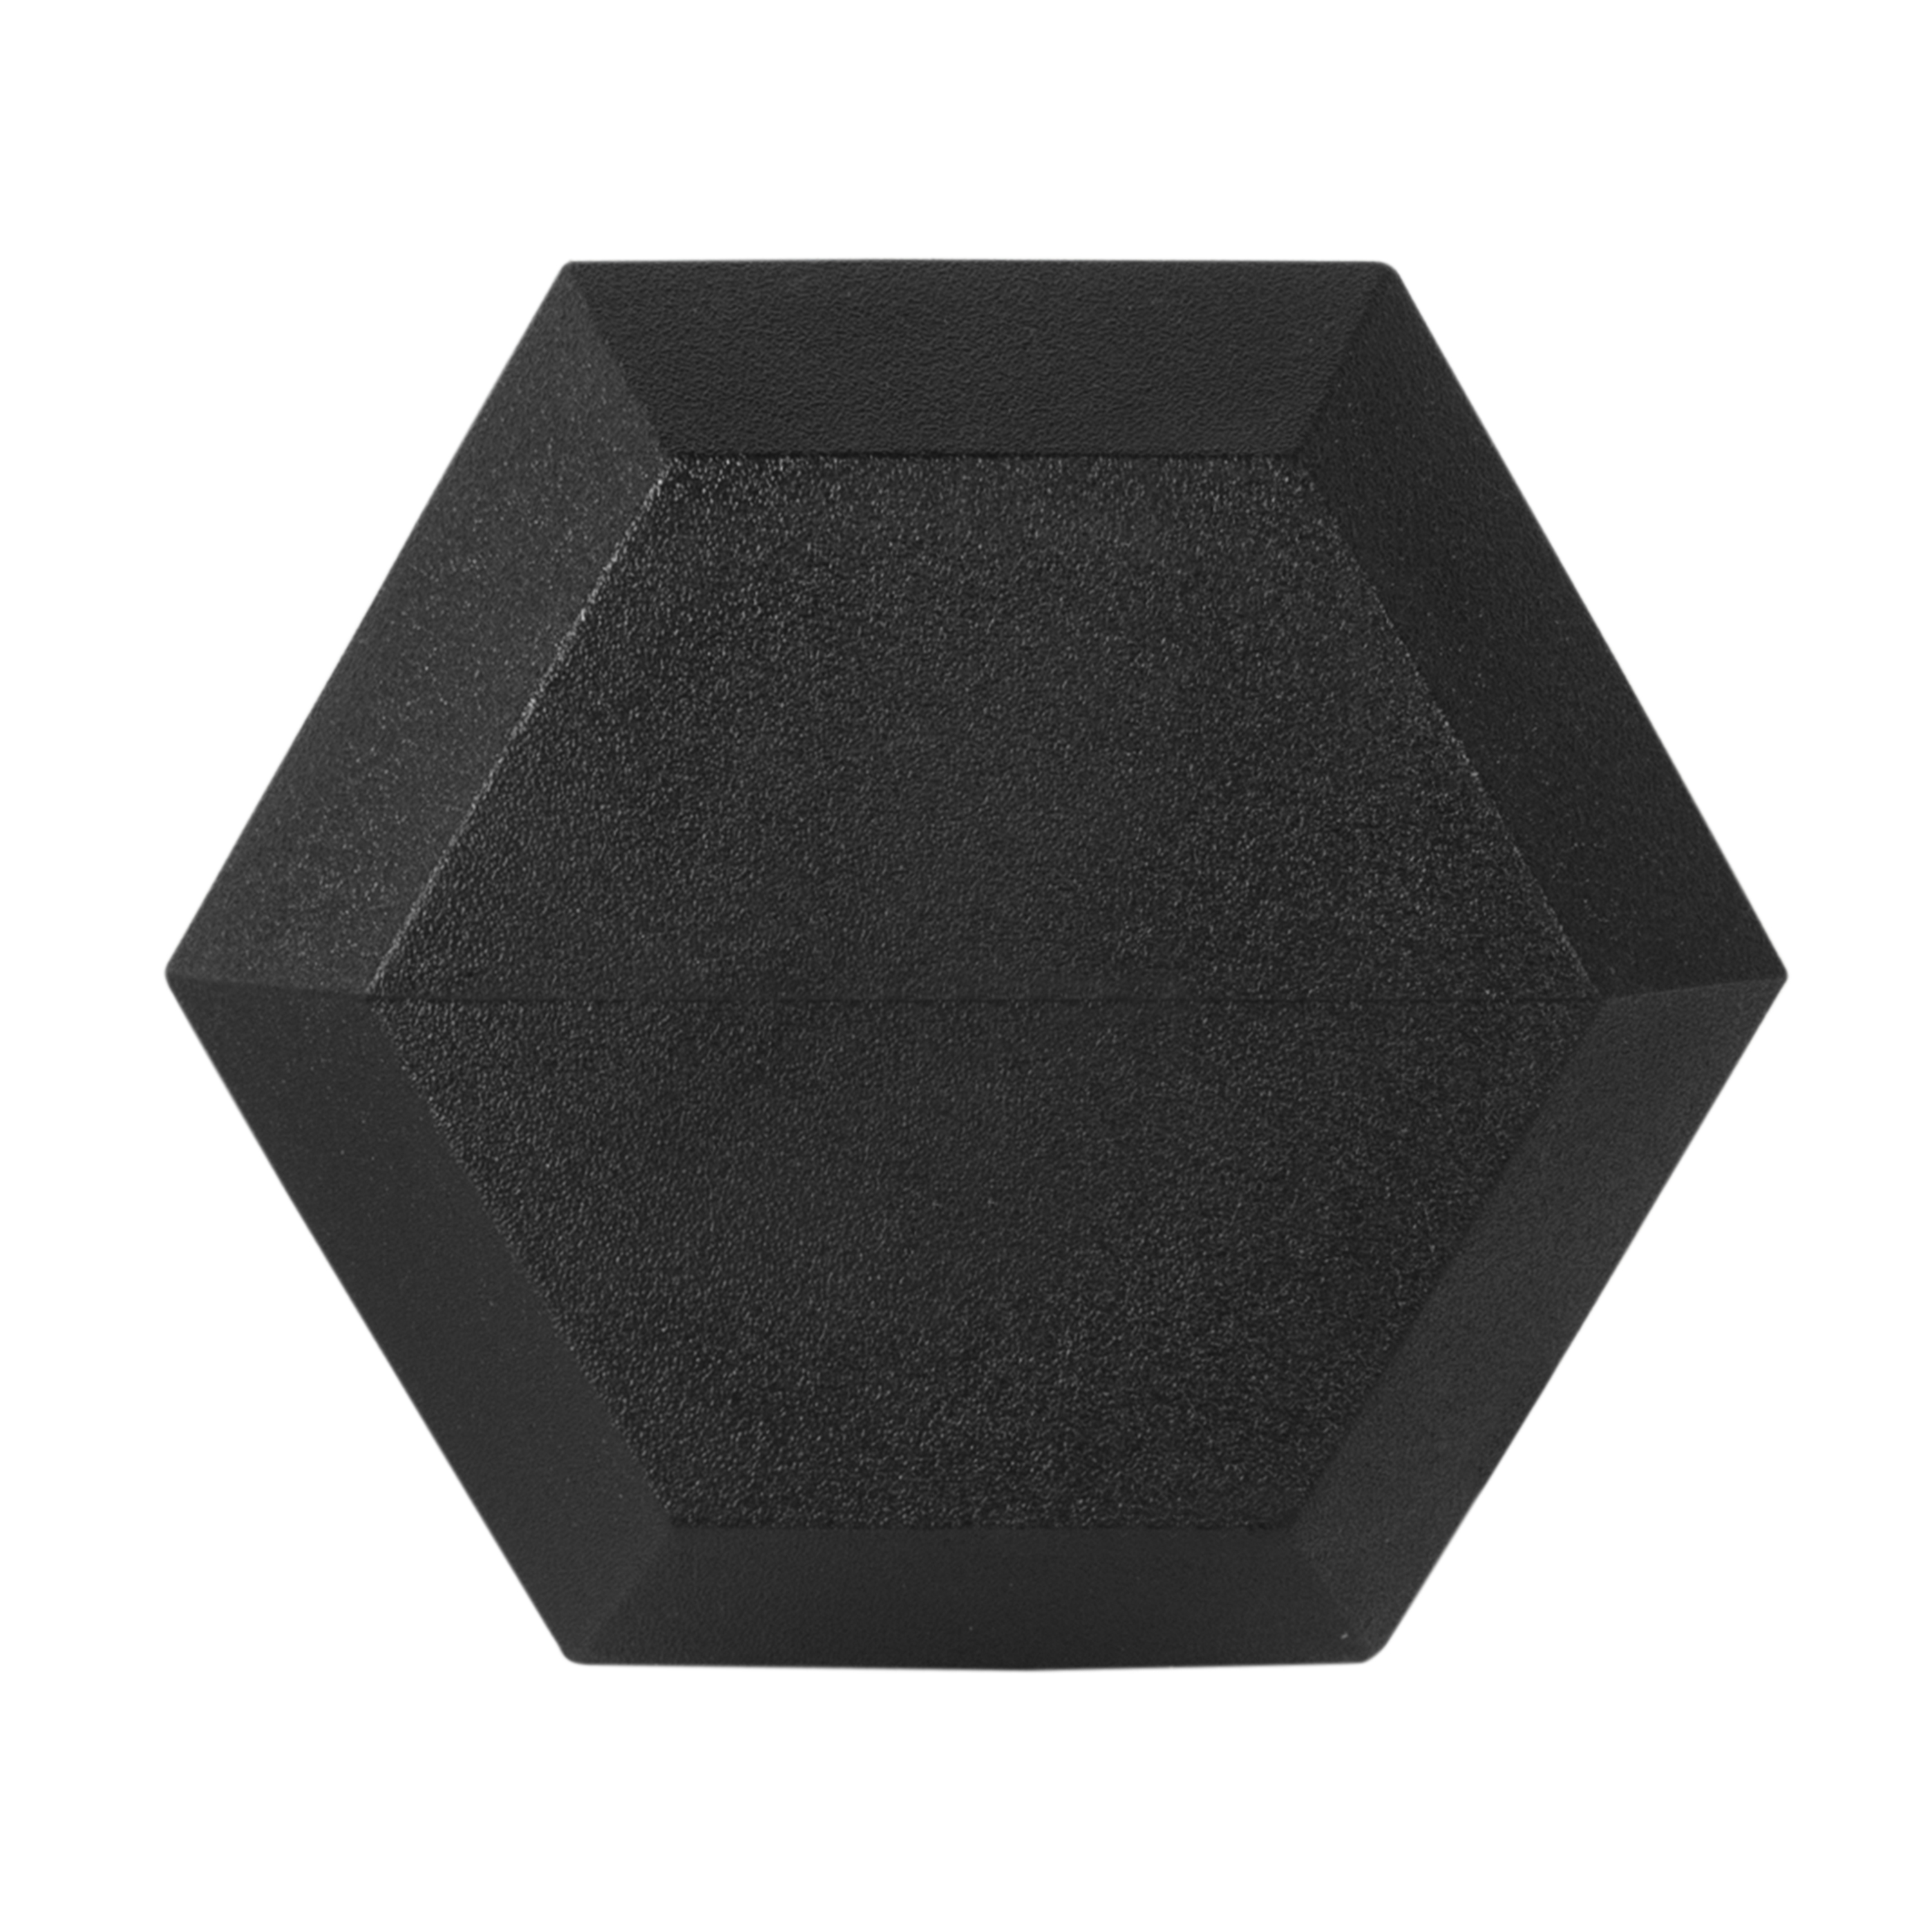 CAP Barbell, 5lb Coated Rubber Hex Dumbbell, Pair - image 3 of 5